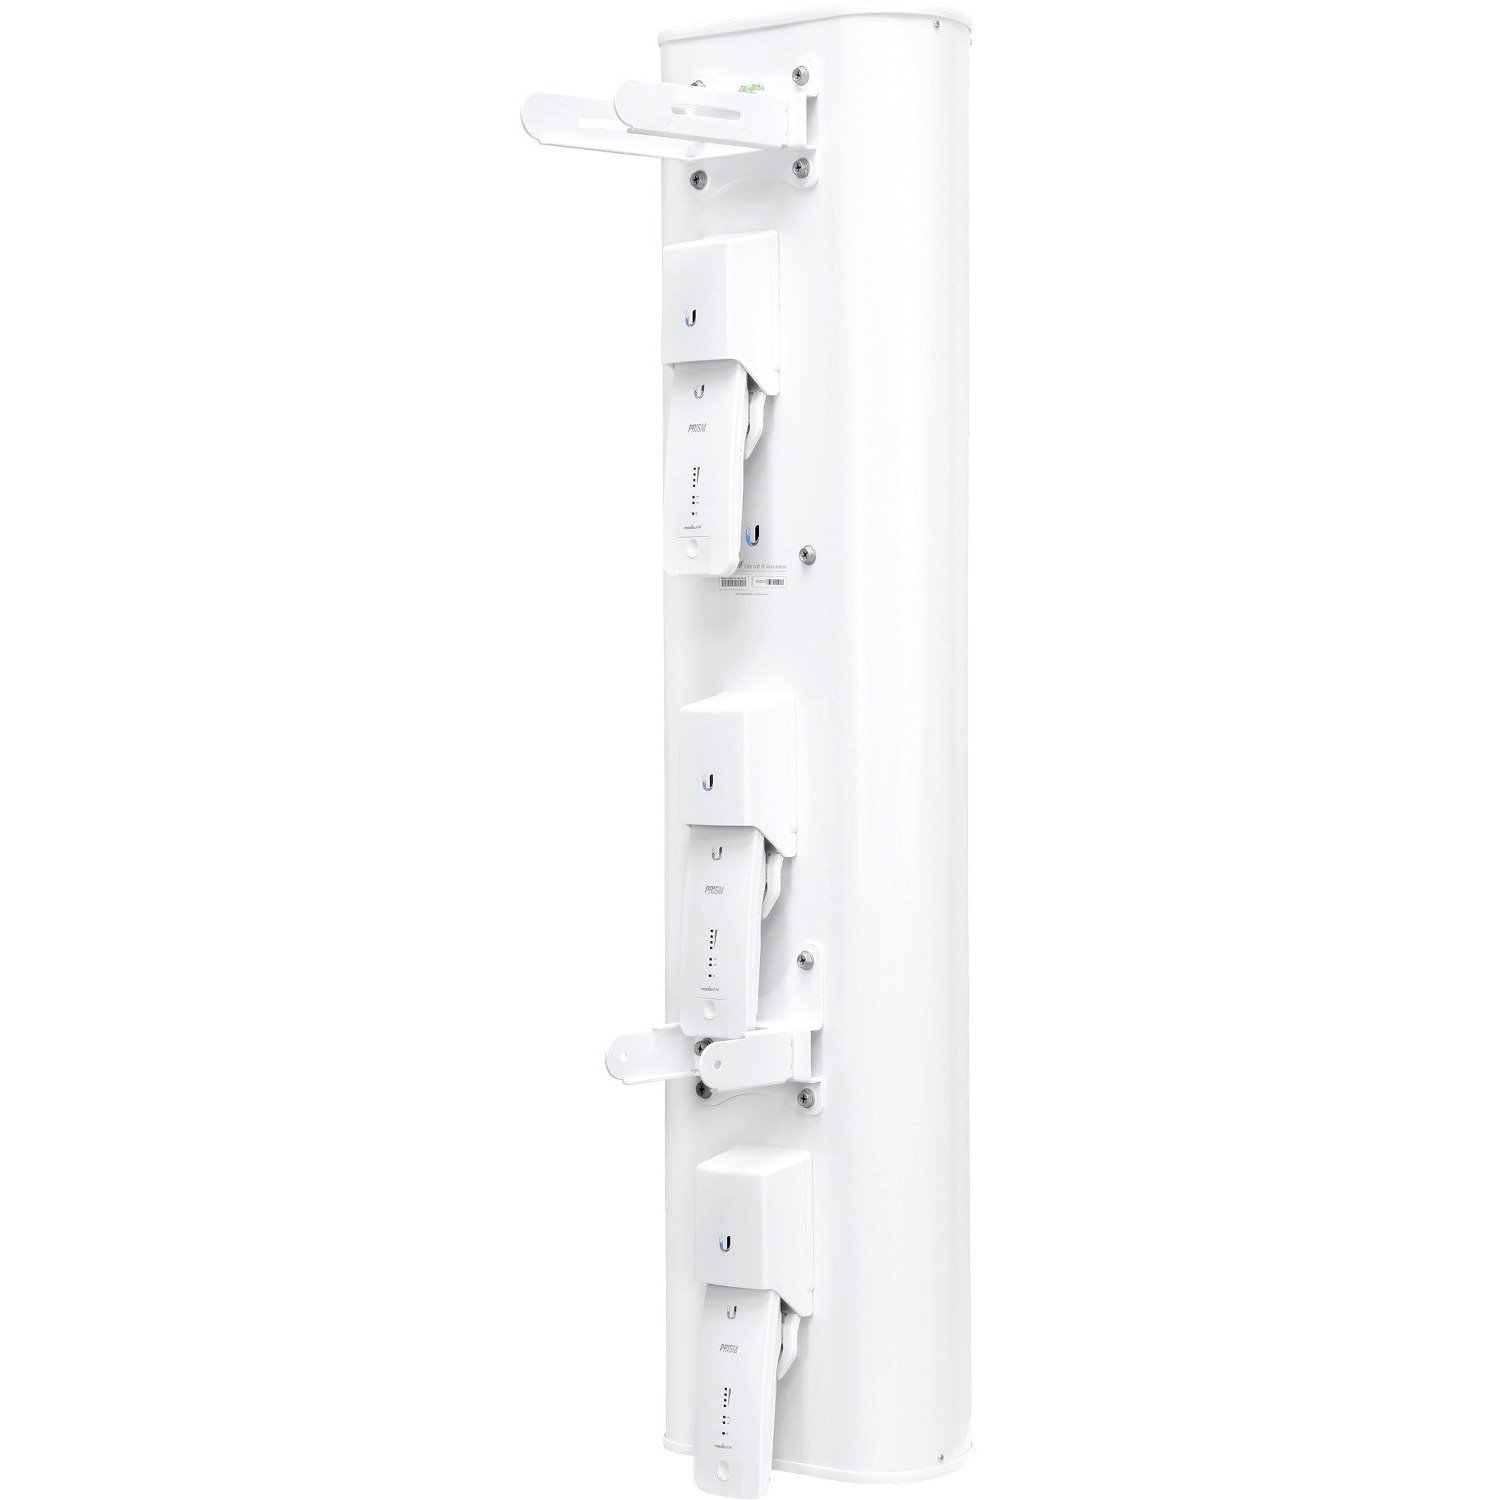 Ubiquiti 5GHz airPrism Sector, 3X Sector Antennas In One - 3 X 30°= 90° High Density Coverage - All Mounting Accessories And Brackets Included